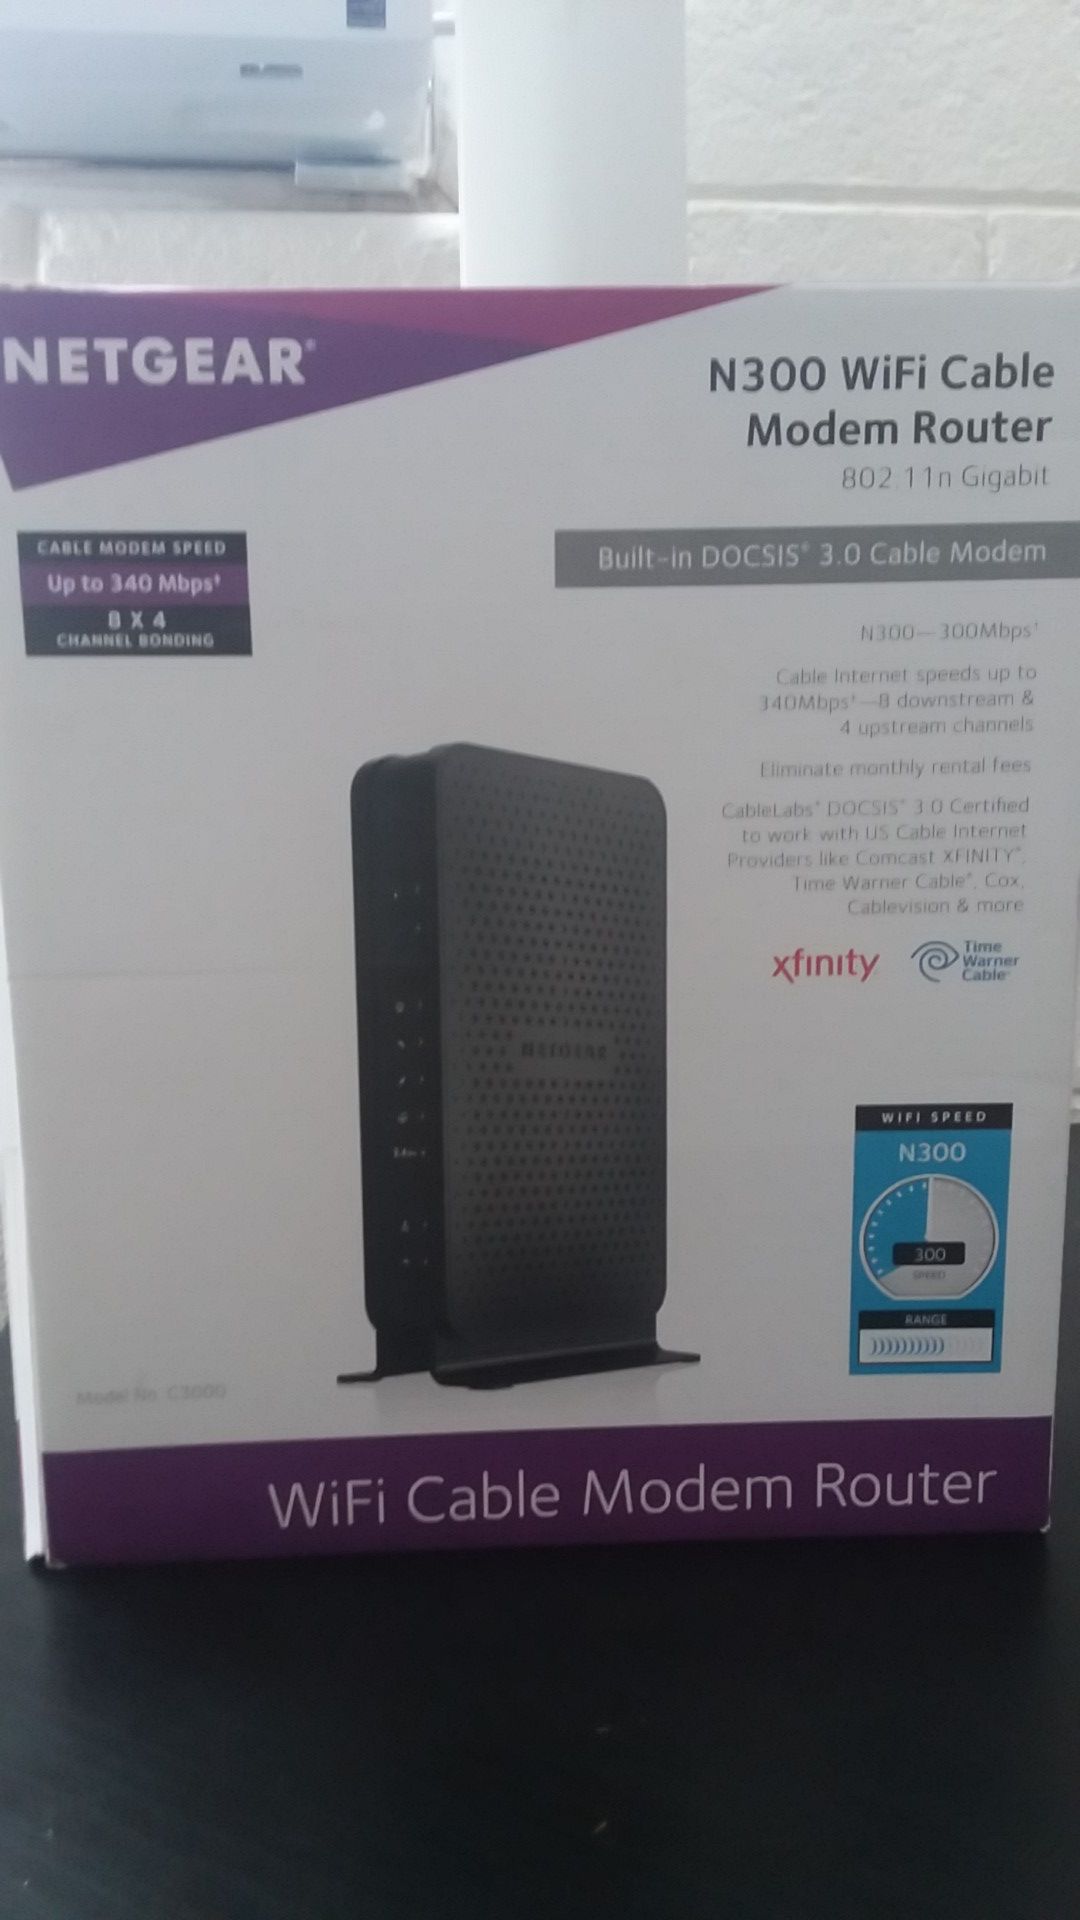 Netgear N300 WiFi Router and Modem